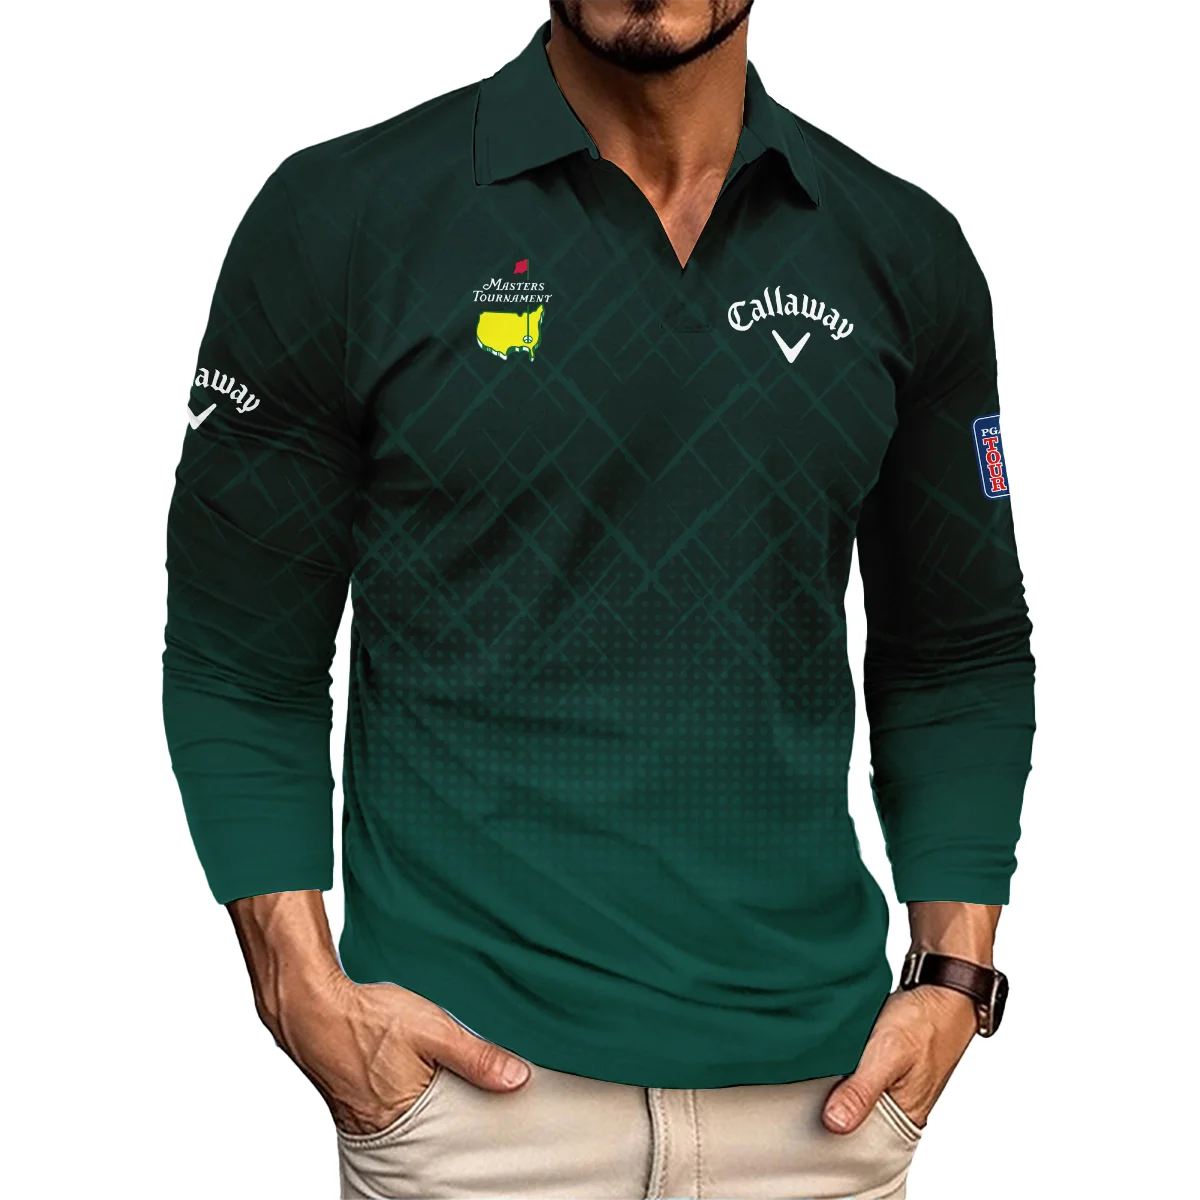 Callaway Masters Tournament Sport Jersey Pattern Dark Green Vneck Polo Shirt Style Classic Polo Shirt For Men